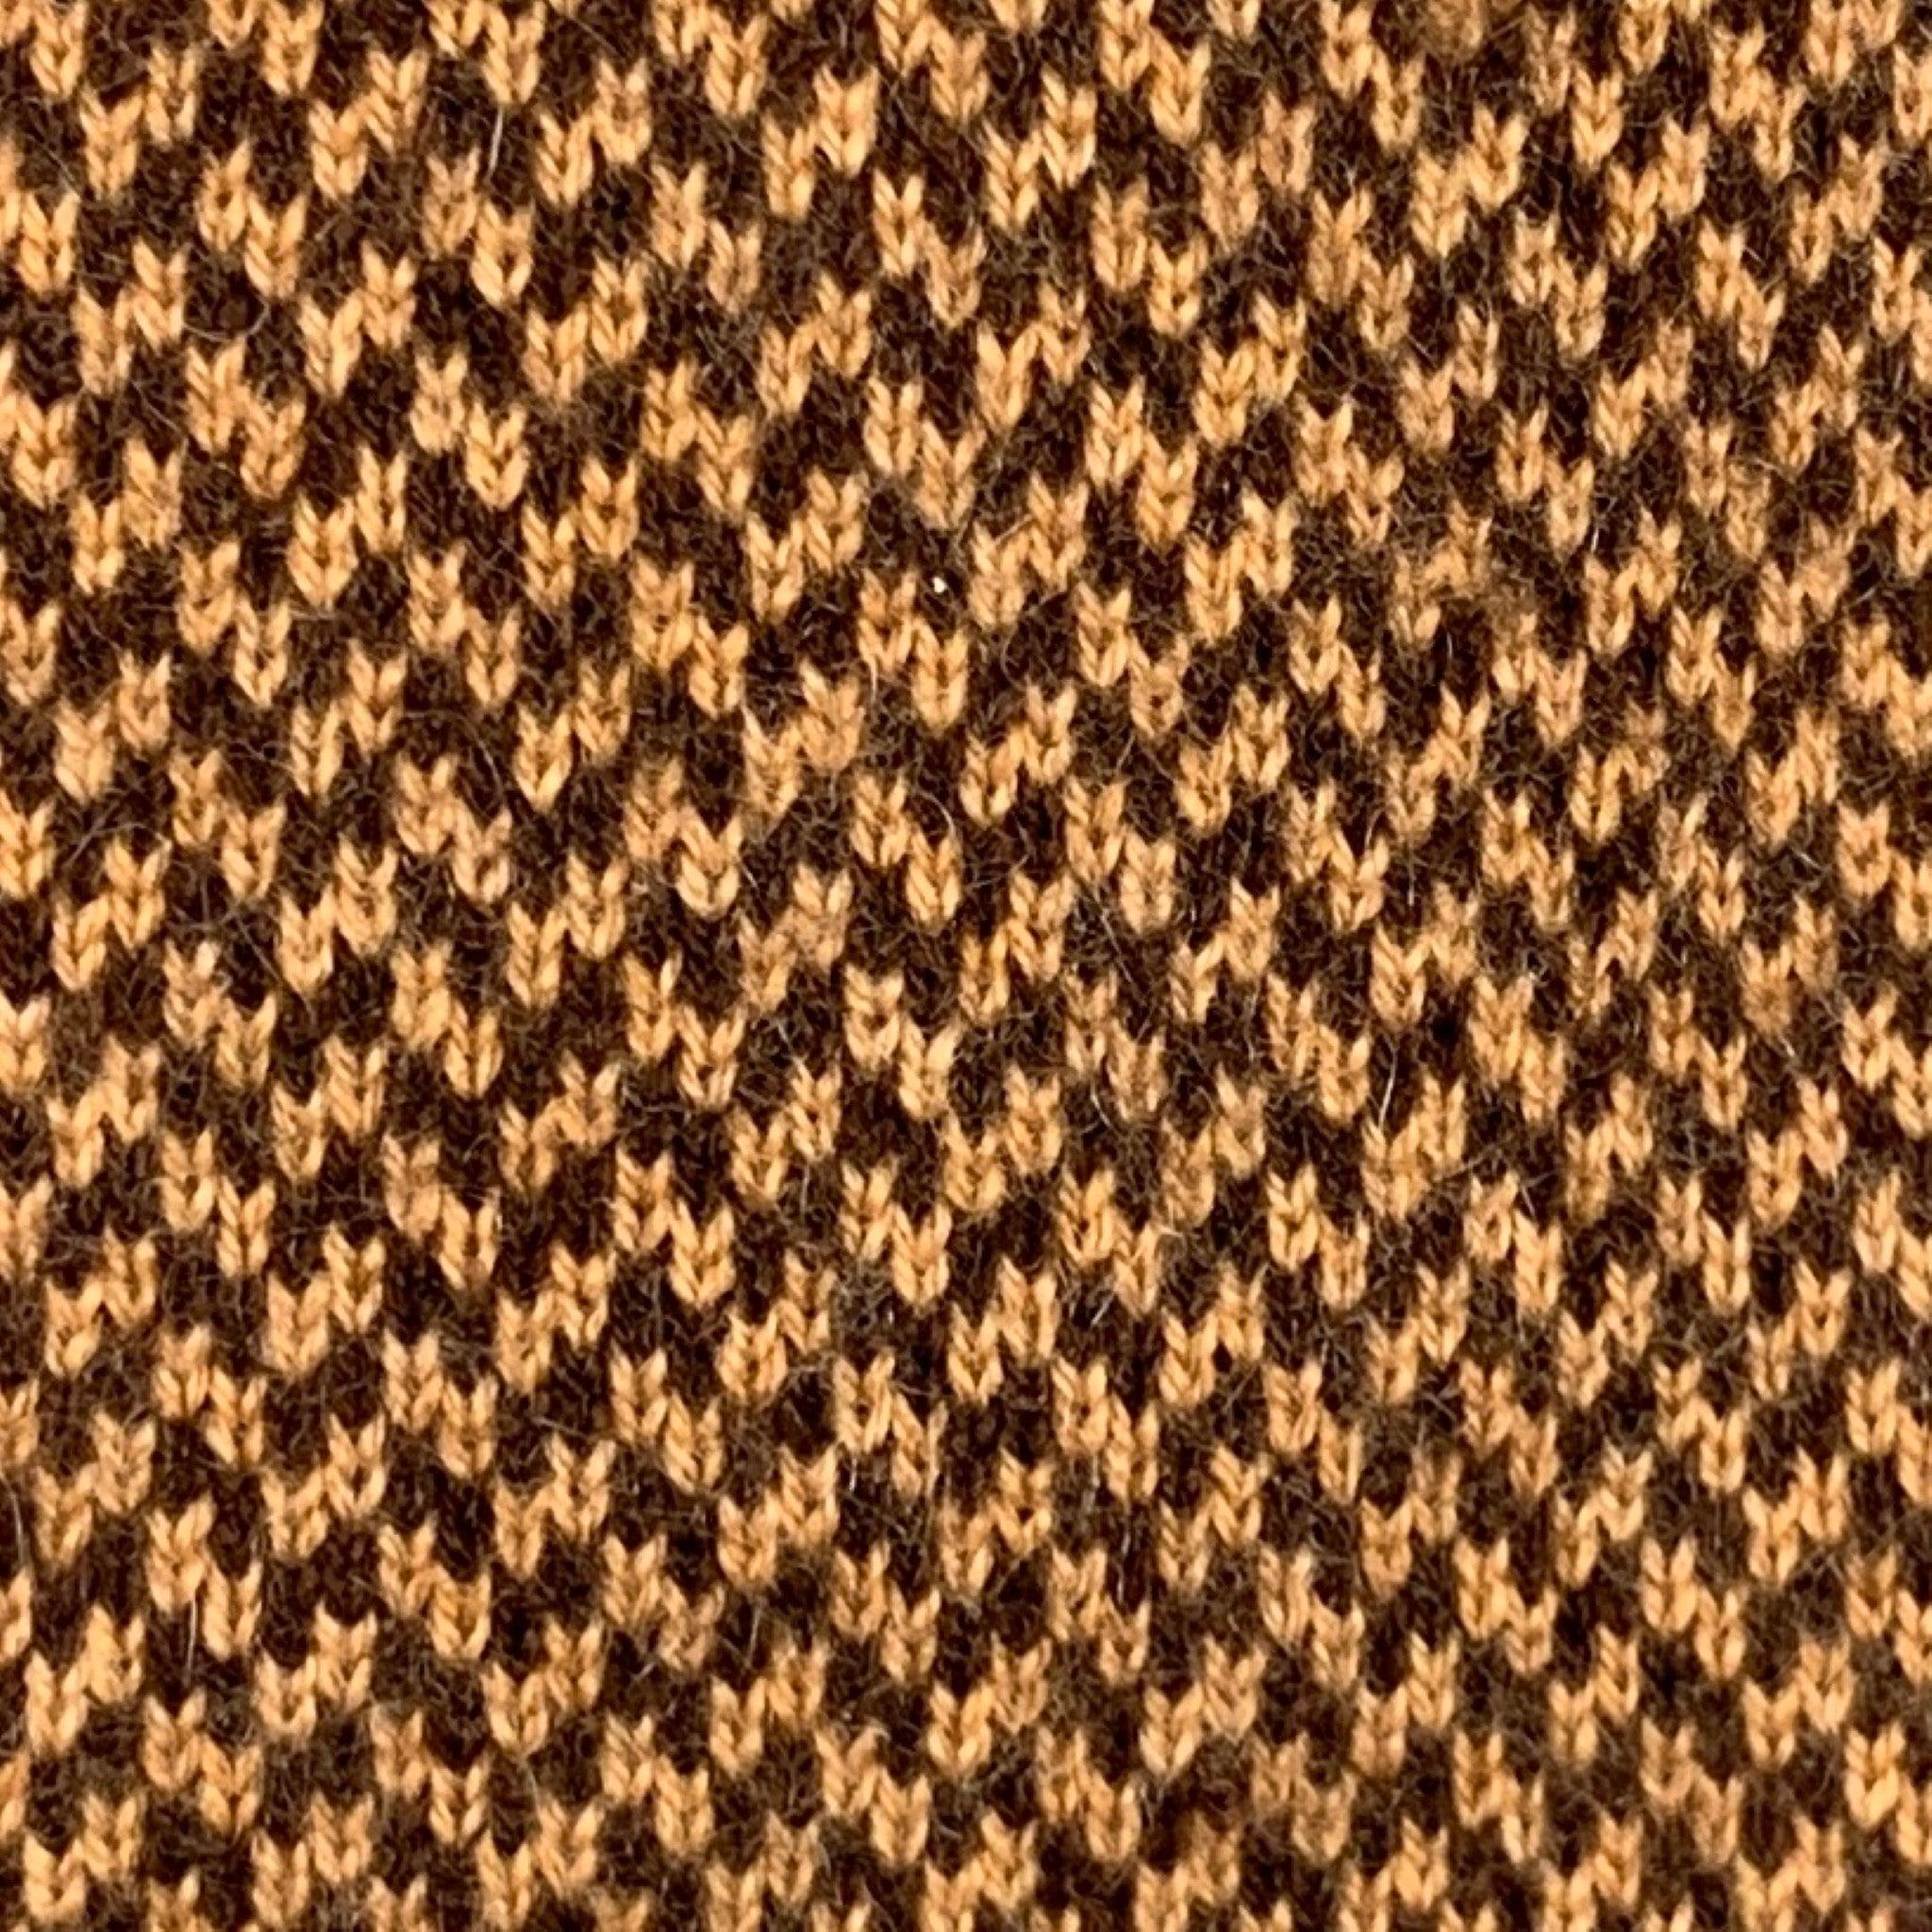 BERGDORF GOODMAN Brown Beige Woven Cashmere Tie In Excellent Condition For Sale In San Francisco, CA